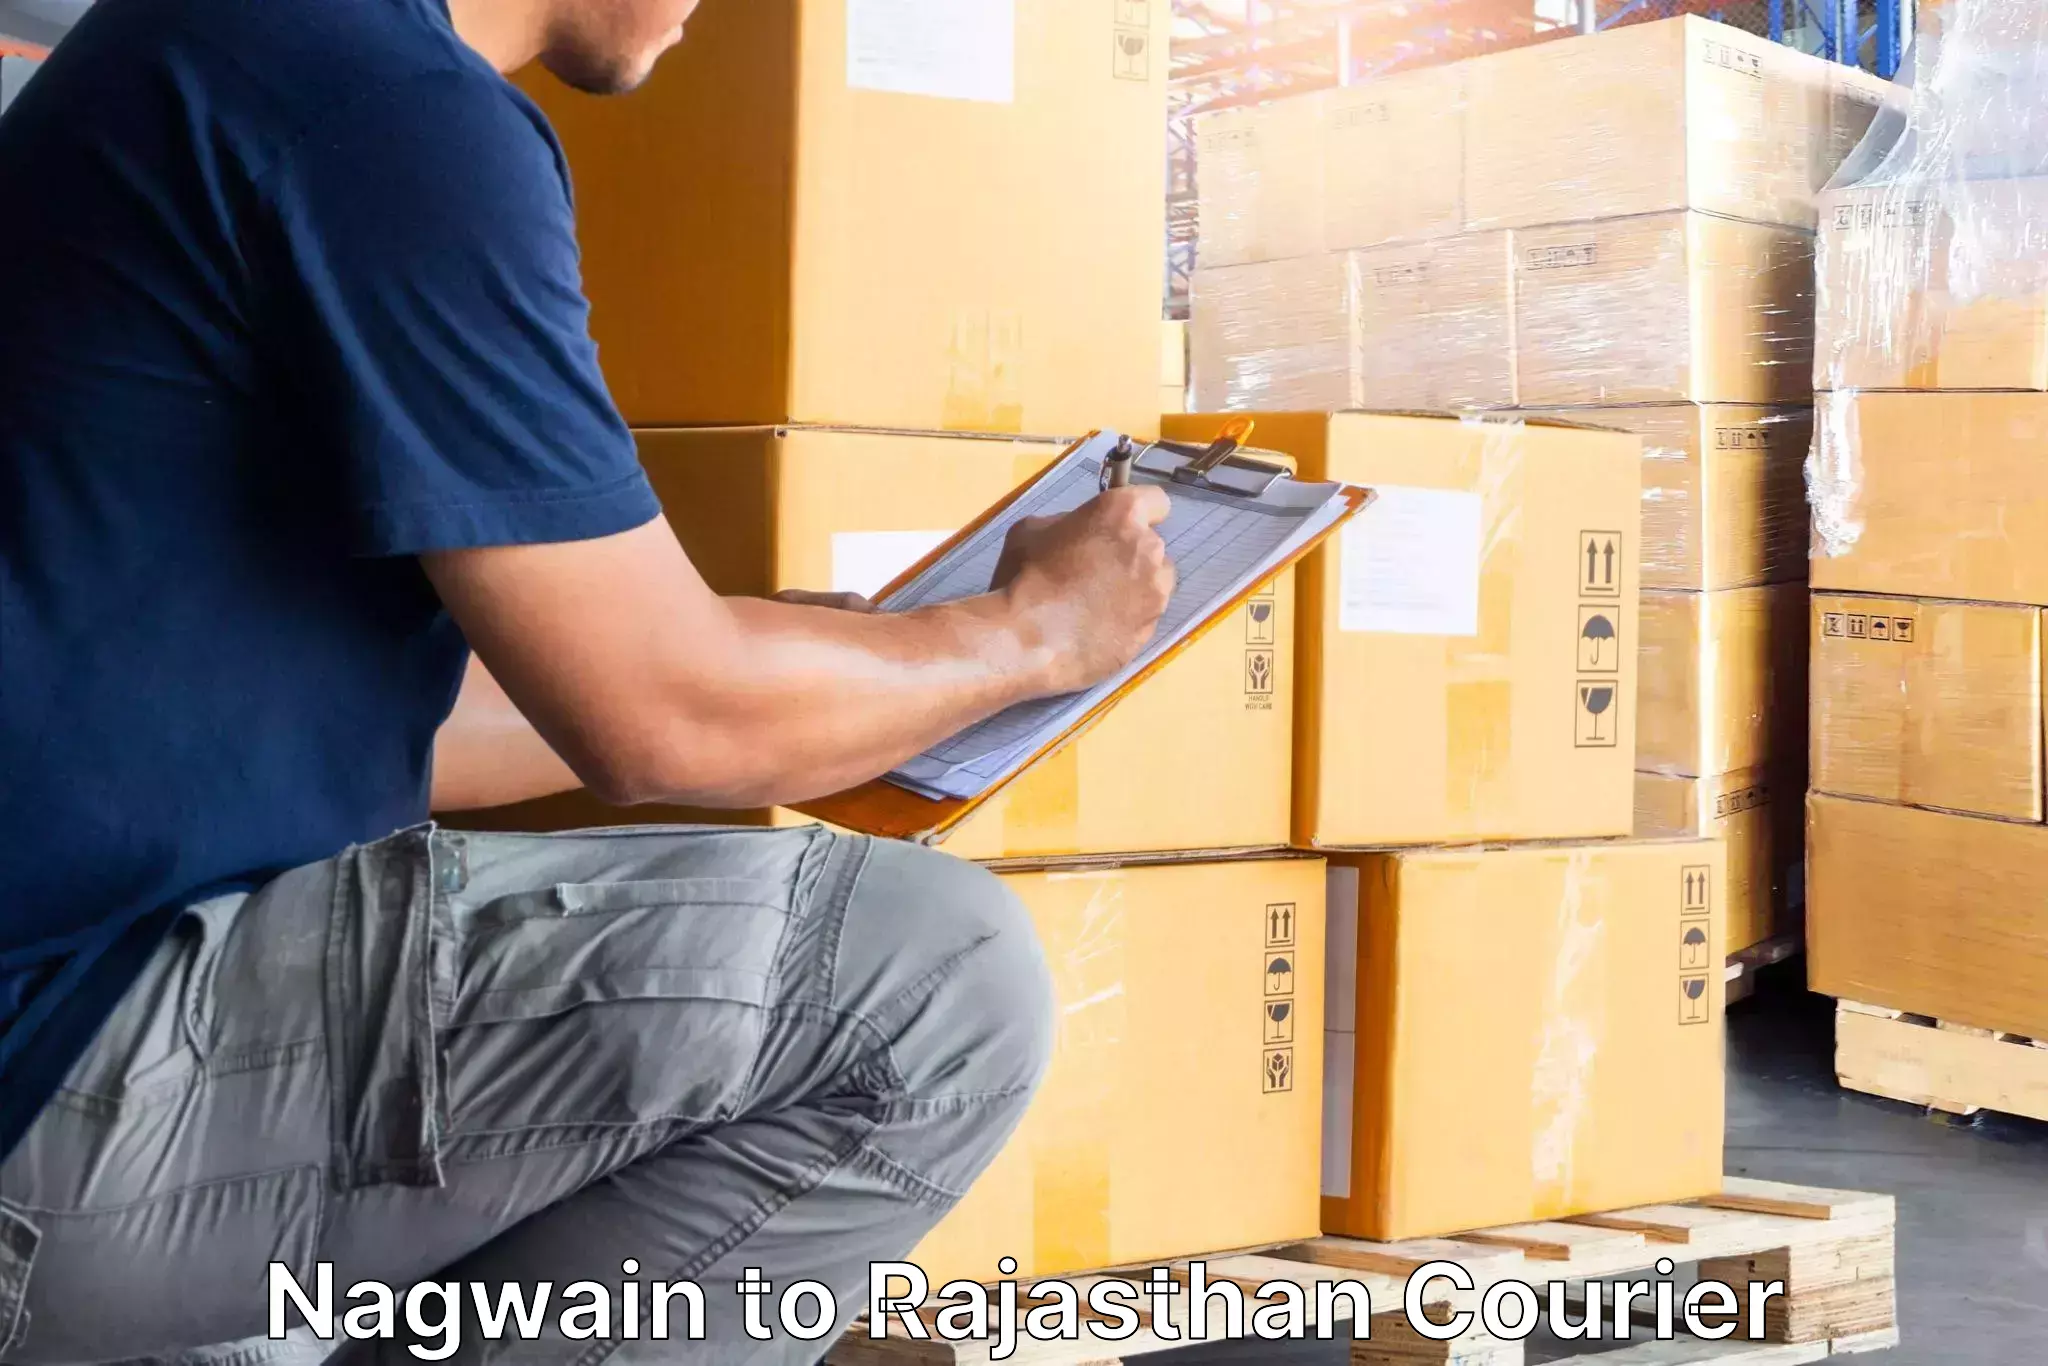 Furniture delivery service Nagwain to Dungarpur